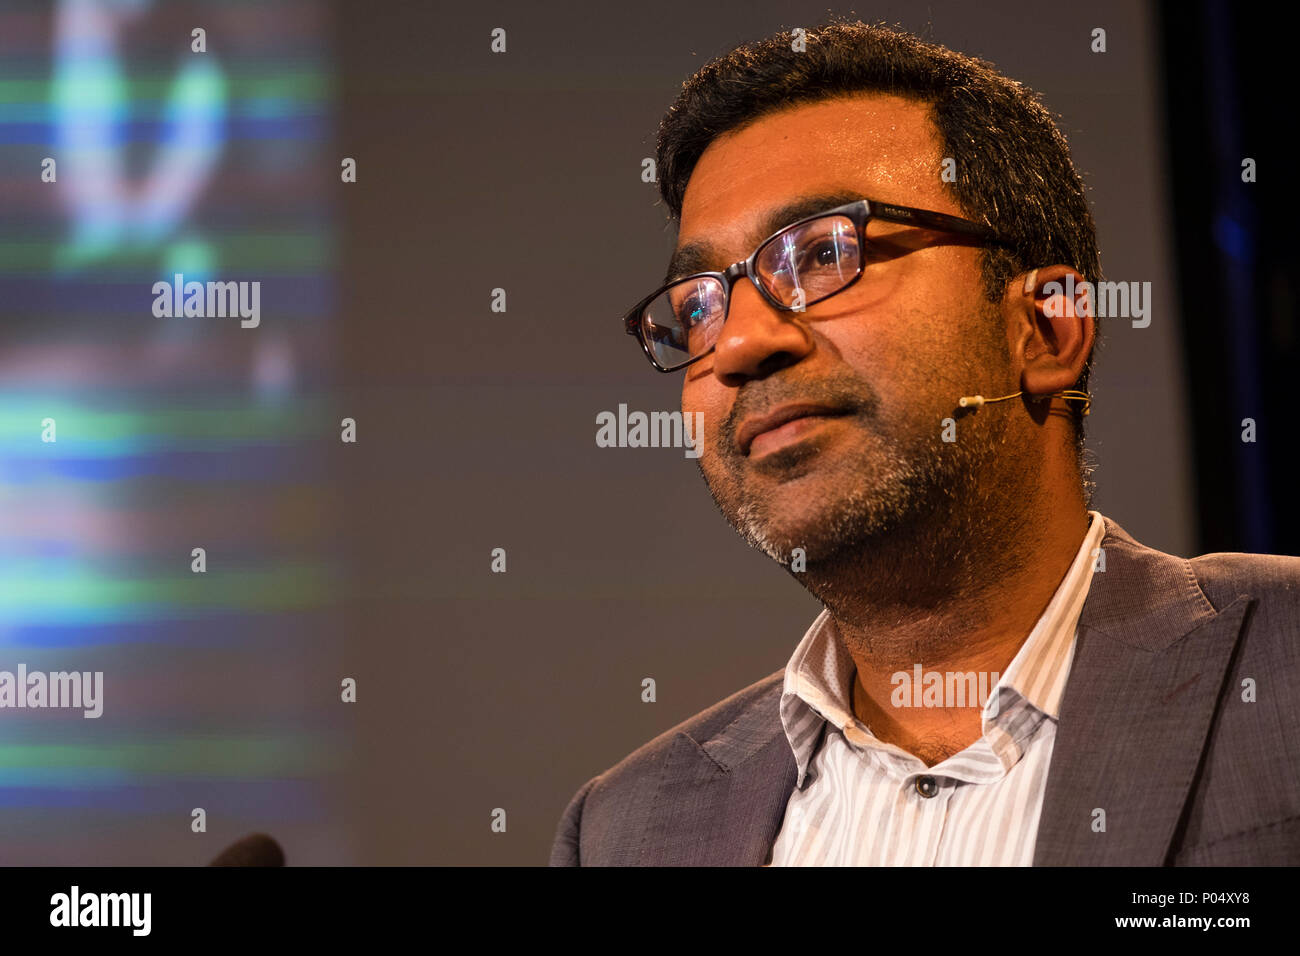 Dr Sujit Sivasundaram , Reader in World History at Cambridge University,  fellow of Gonville and Caius College, Cambridge. He is the author of 'Nature and the Godly Empire: Science and Evangelical Mission in the Pacific, 1795-1850'.  At the Hay Festival  of Literature and the Arts, May 2018 Stock Photo